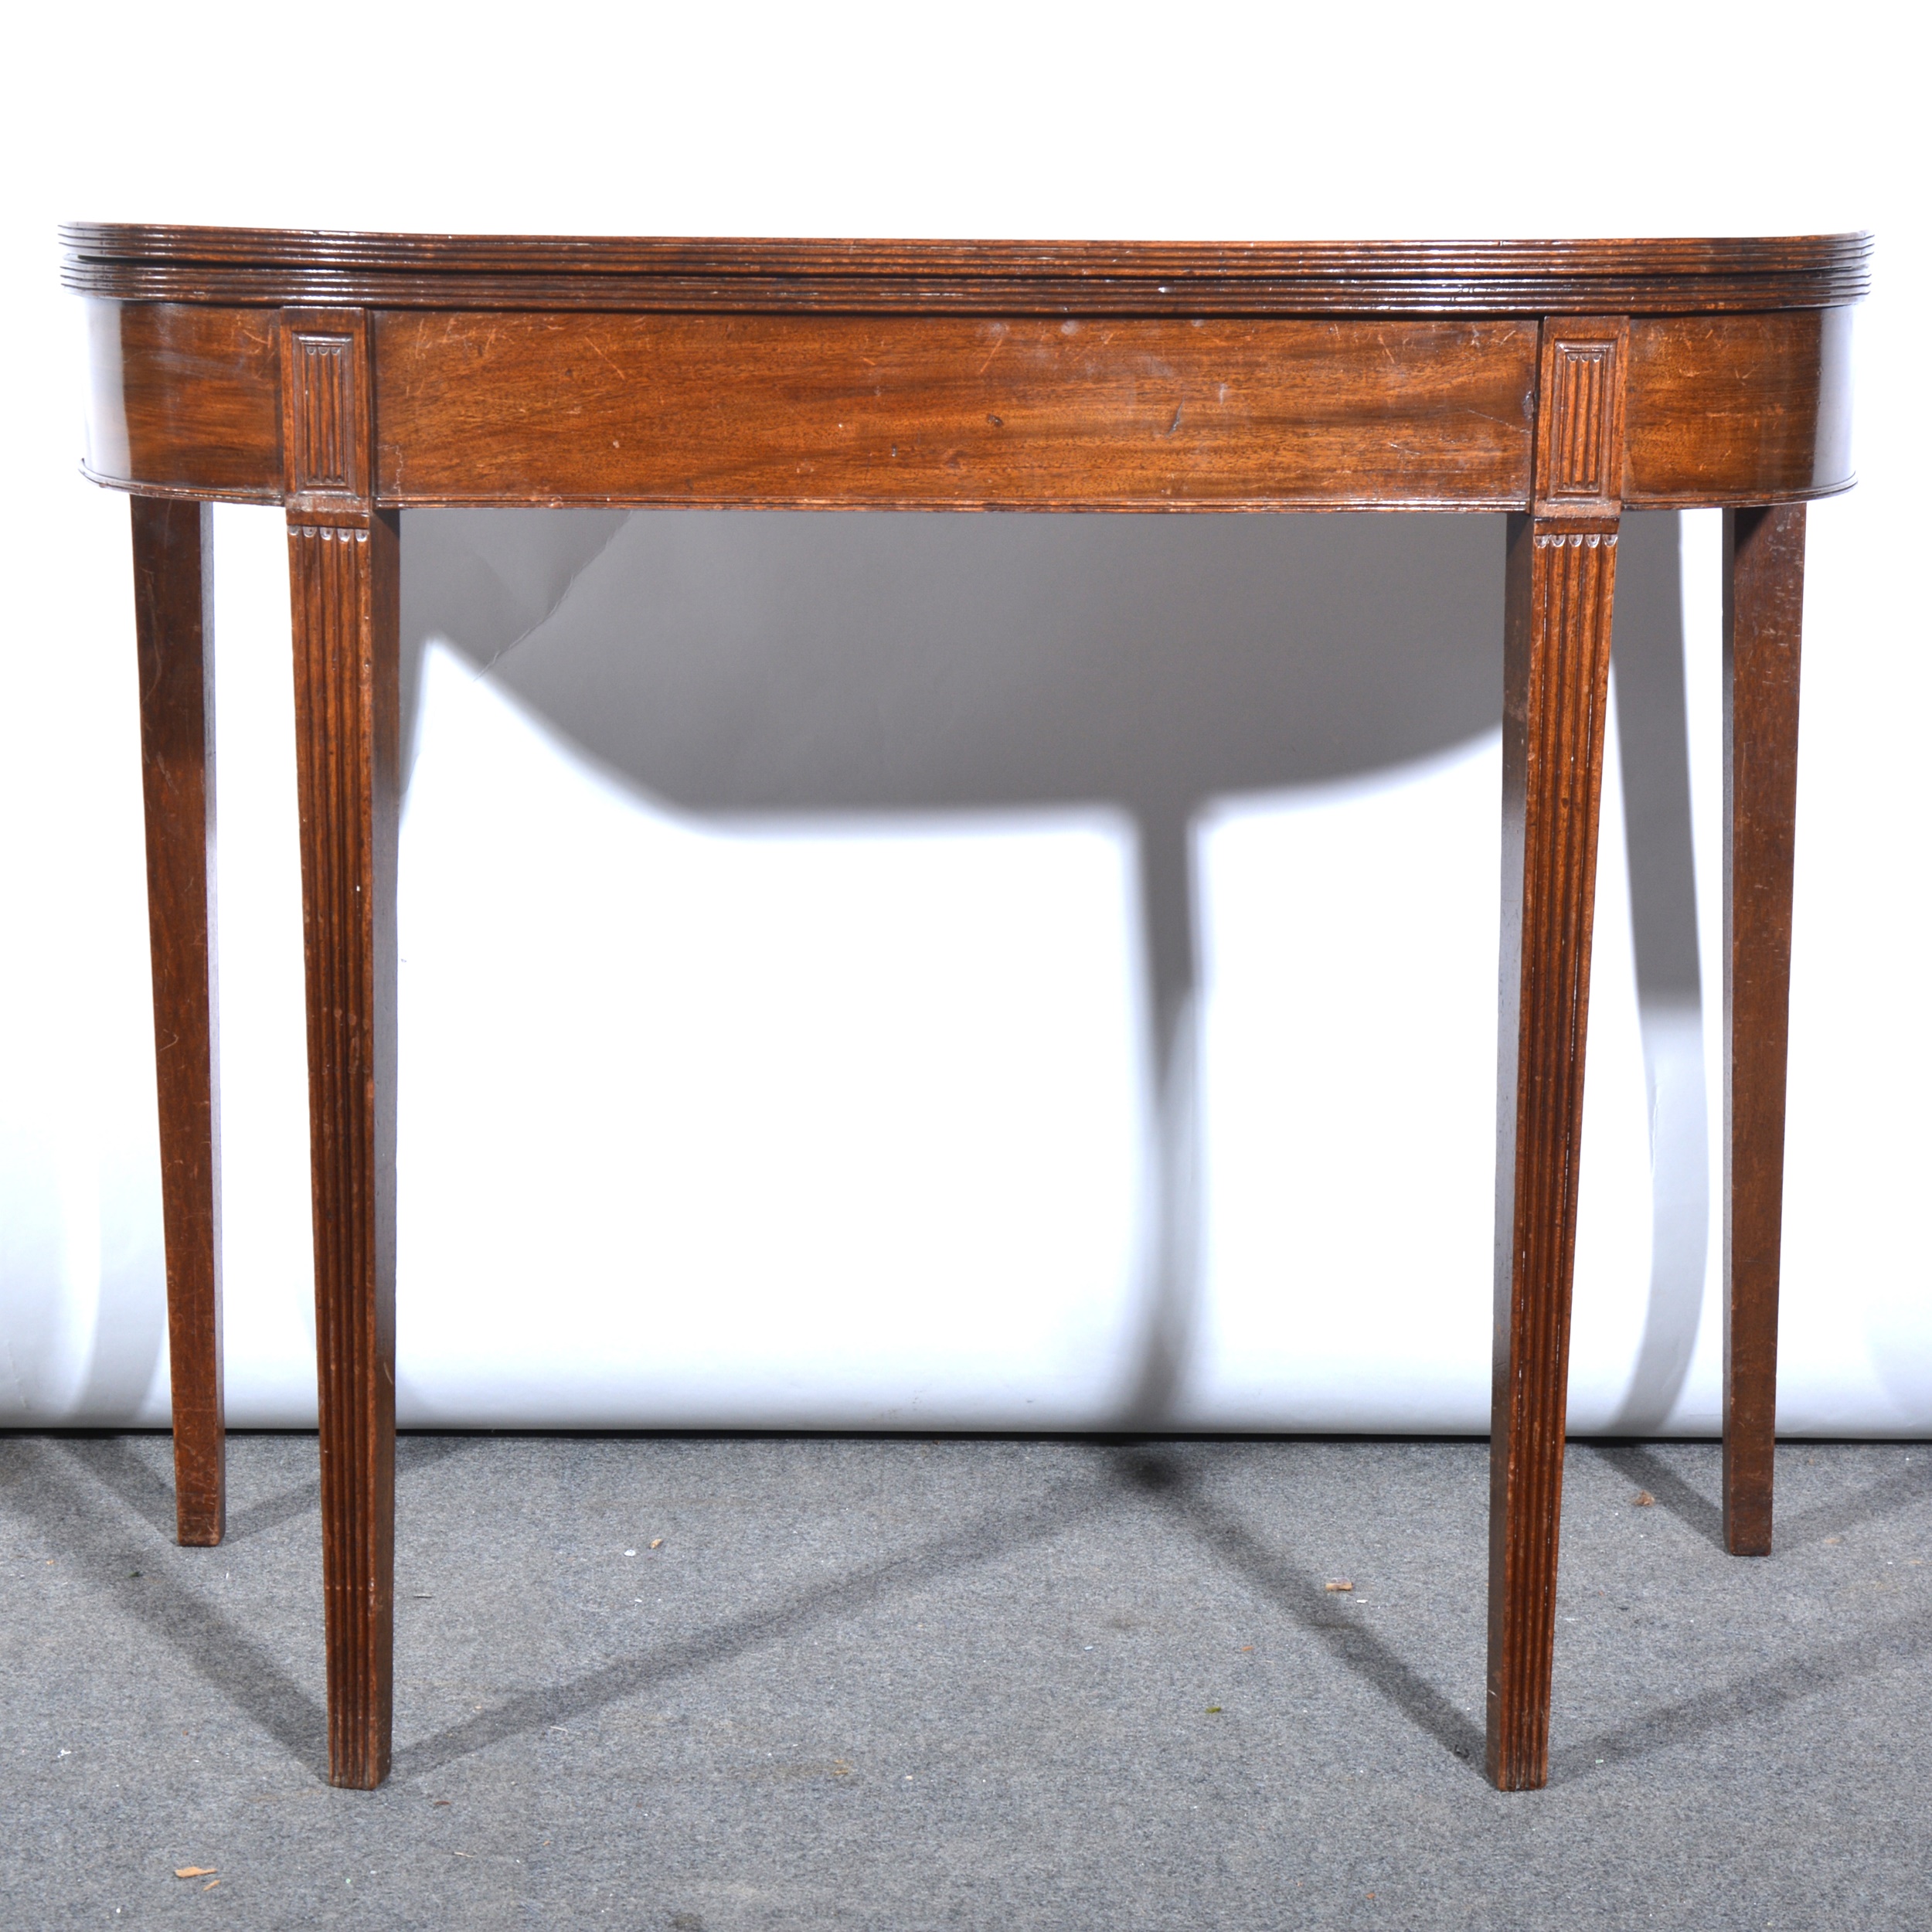 George III mahogany card table, D-shape foldover top, baize lined interior, - Image 2 of 2